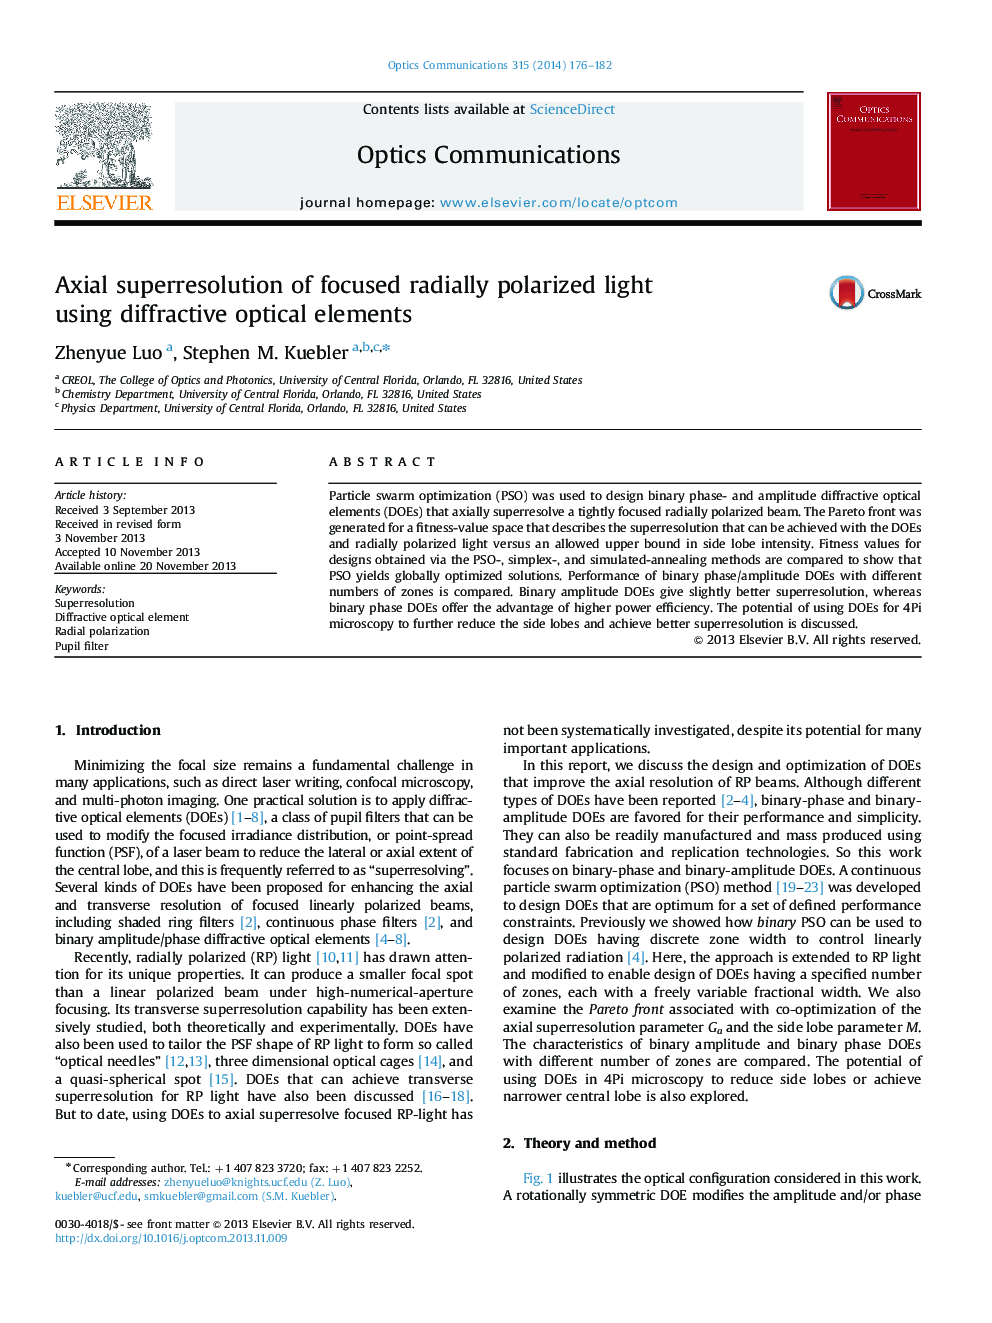 Axial superresolution of focused radially polarized light using diffractive optical elements